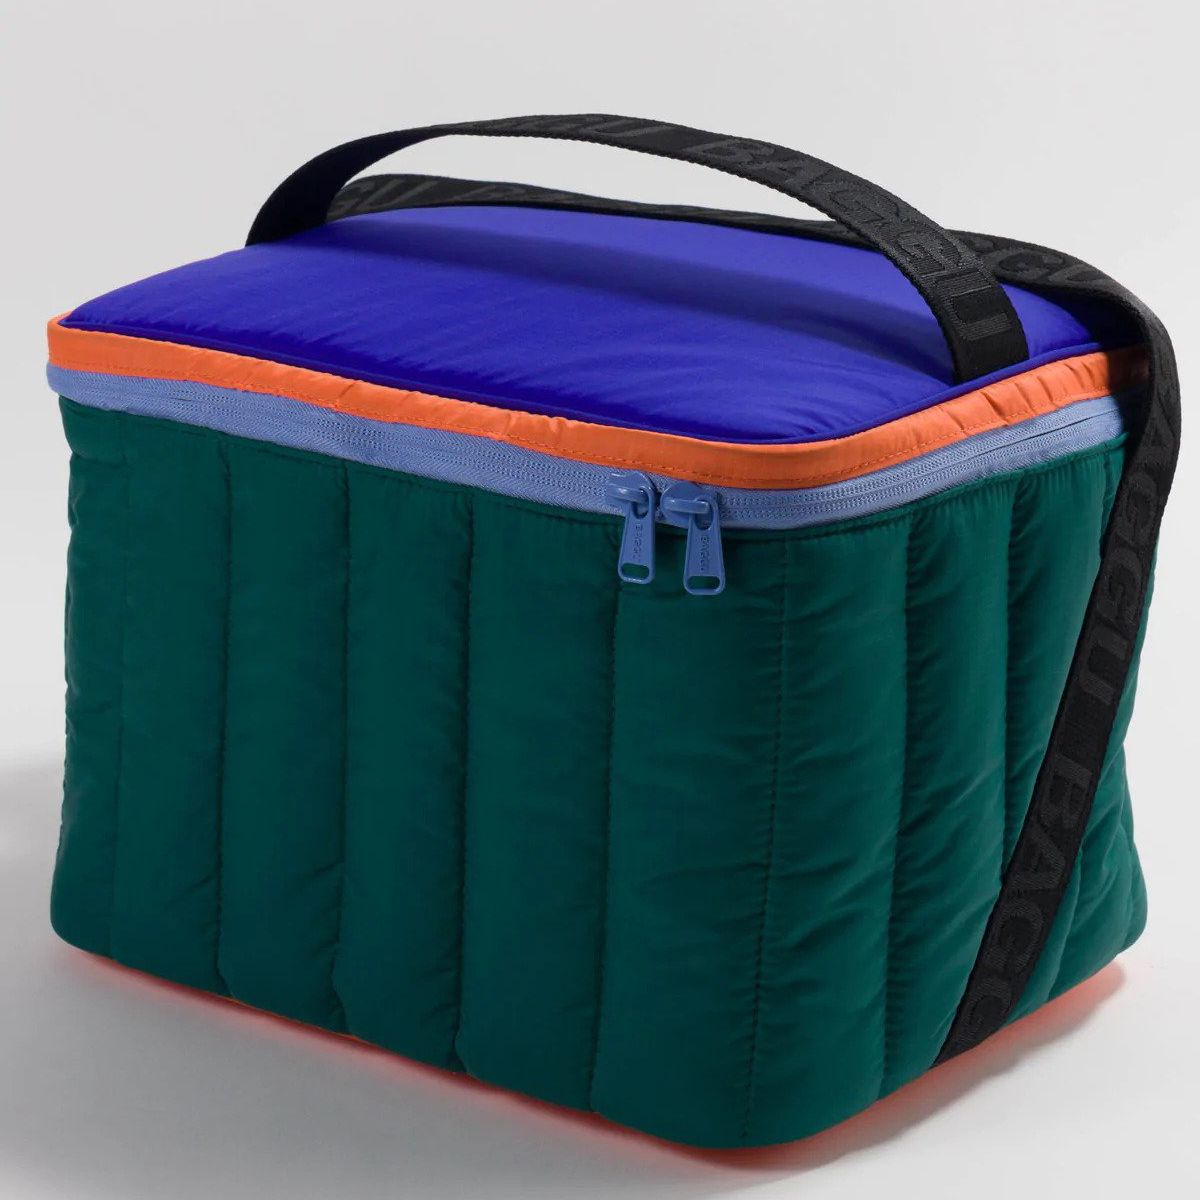 A color blocked cooler